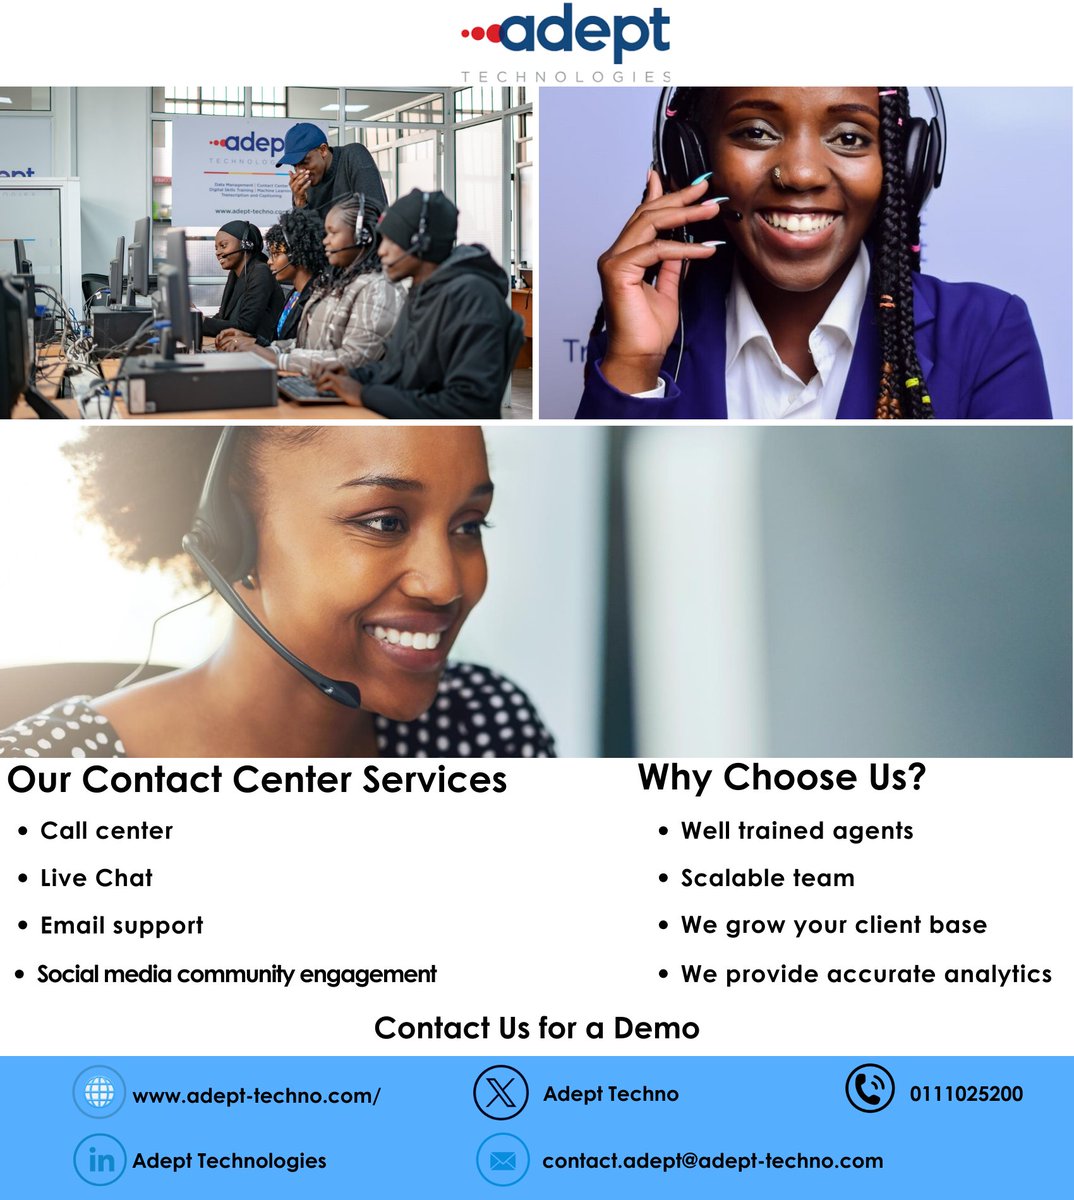 As contact center optimization experts we're dedicated to exceeding your expectations every step of the way. Let us elevate your customer experience and drive success together. bit.ly/3wCbS49 #contactcenter #customerexperience #customersupport